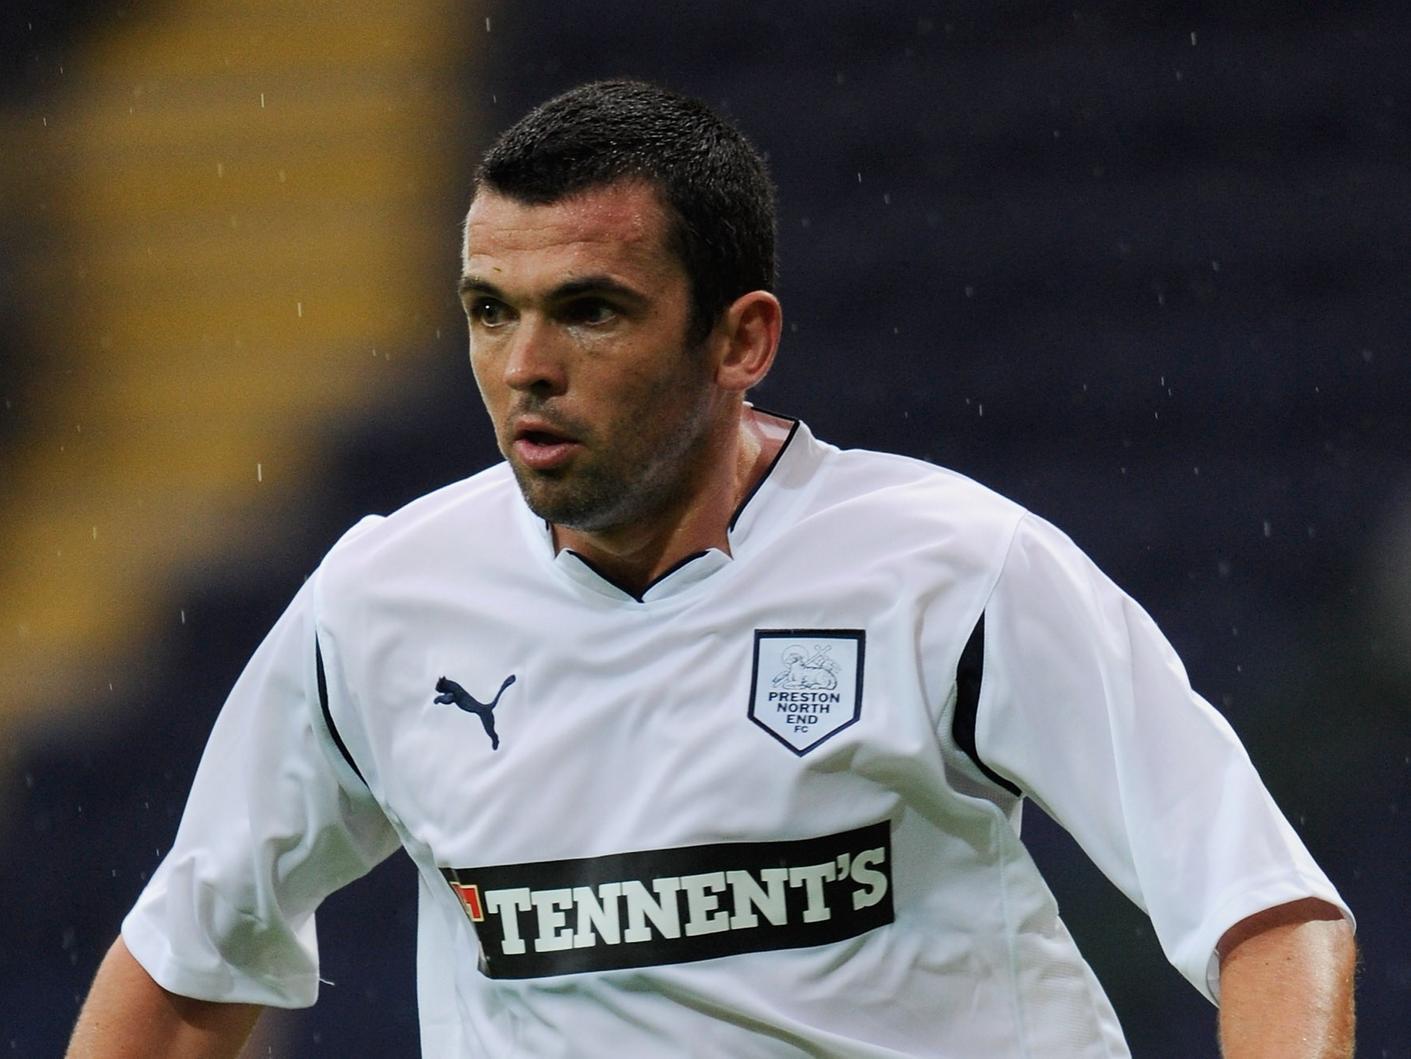 The Scottish left-back was appointed assistant manager at Millwall last year under newly installed manager Gary Rowett